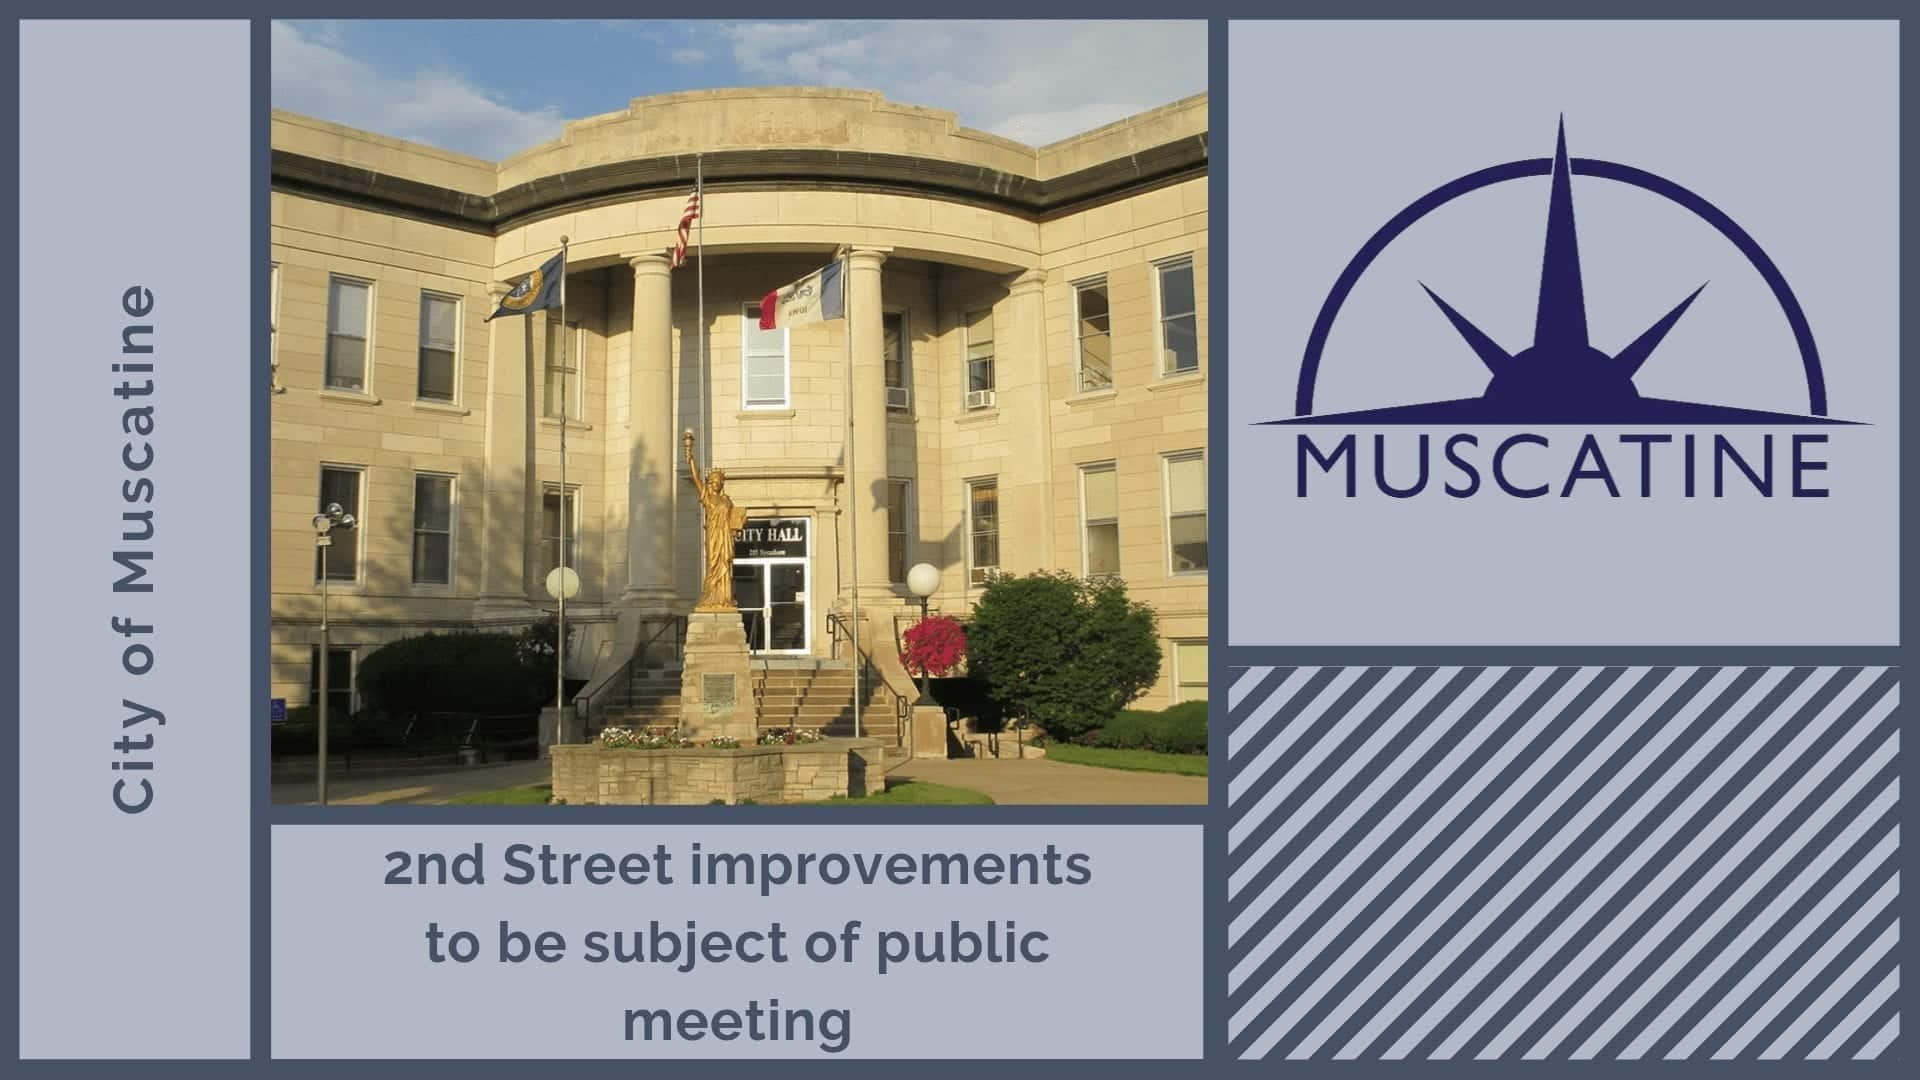 2nd Street improvements to be subject of public meeting